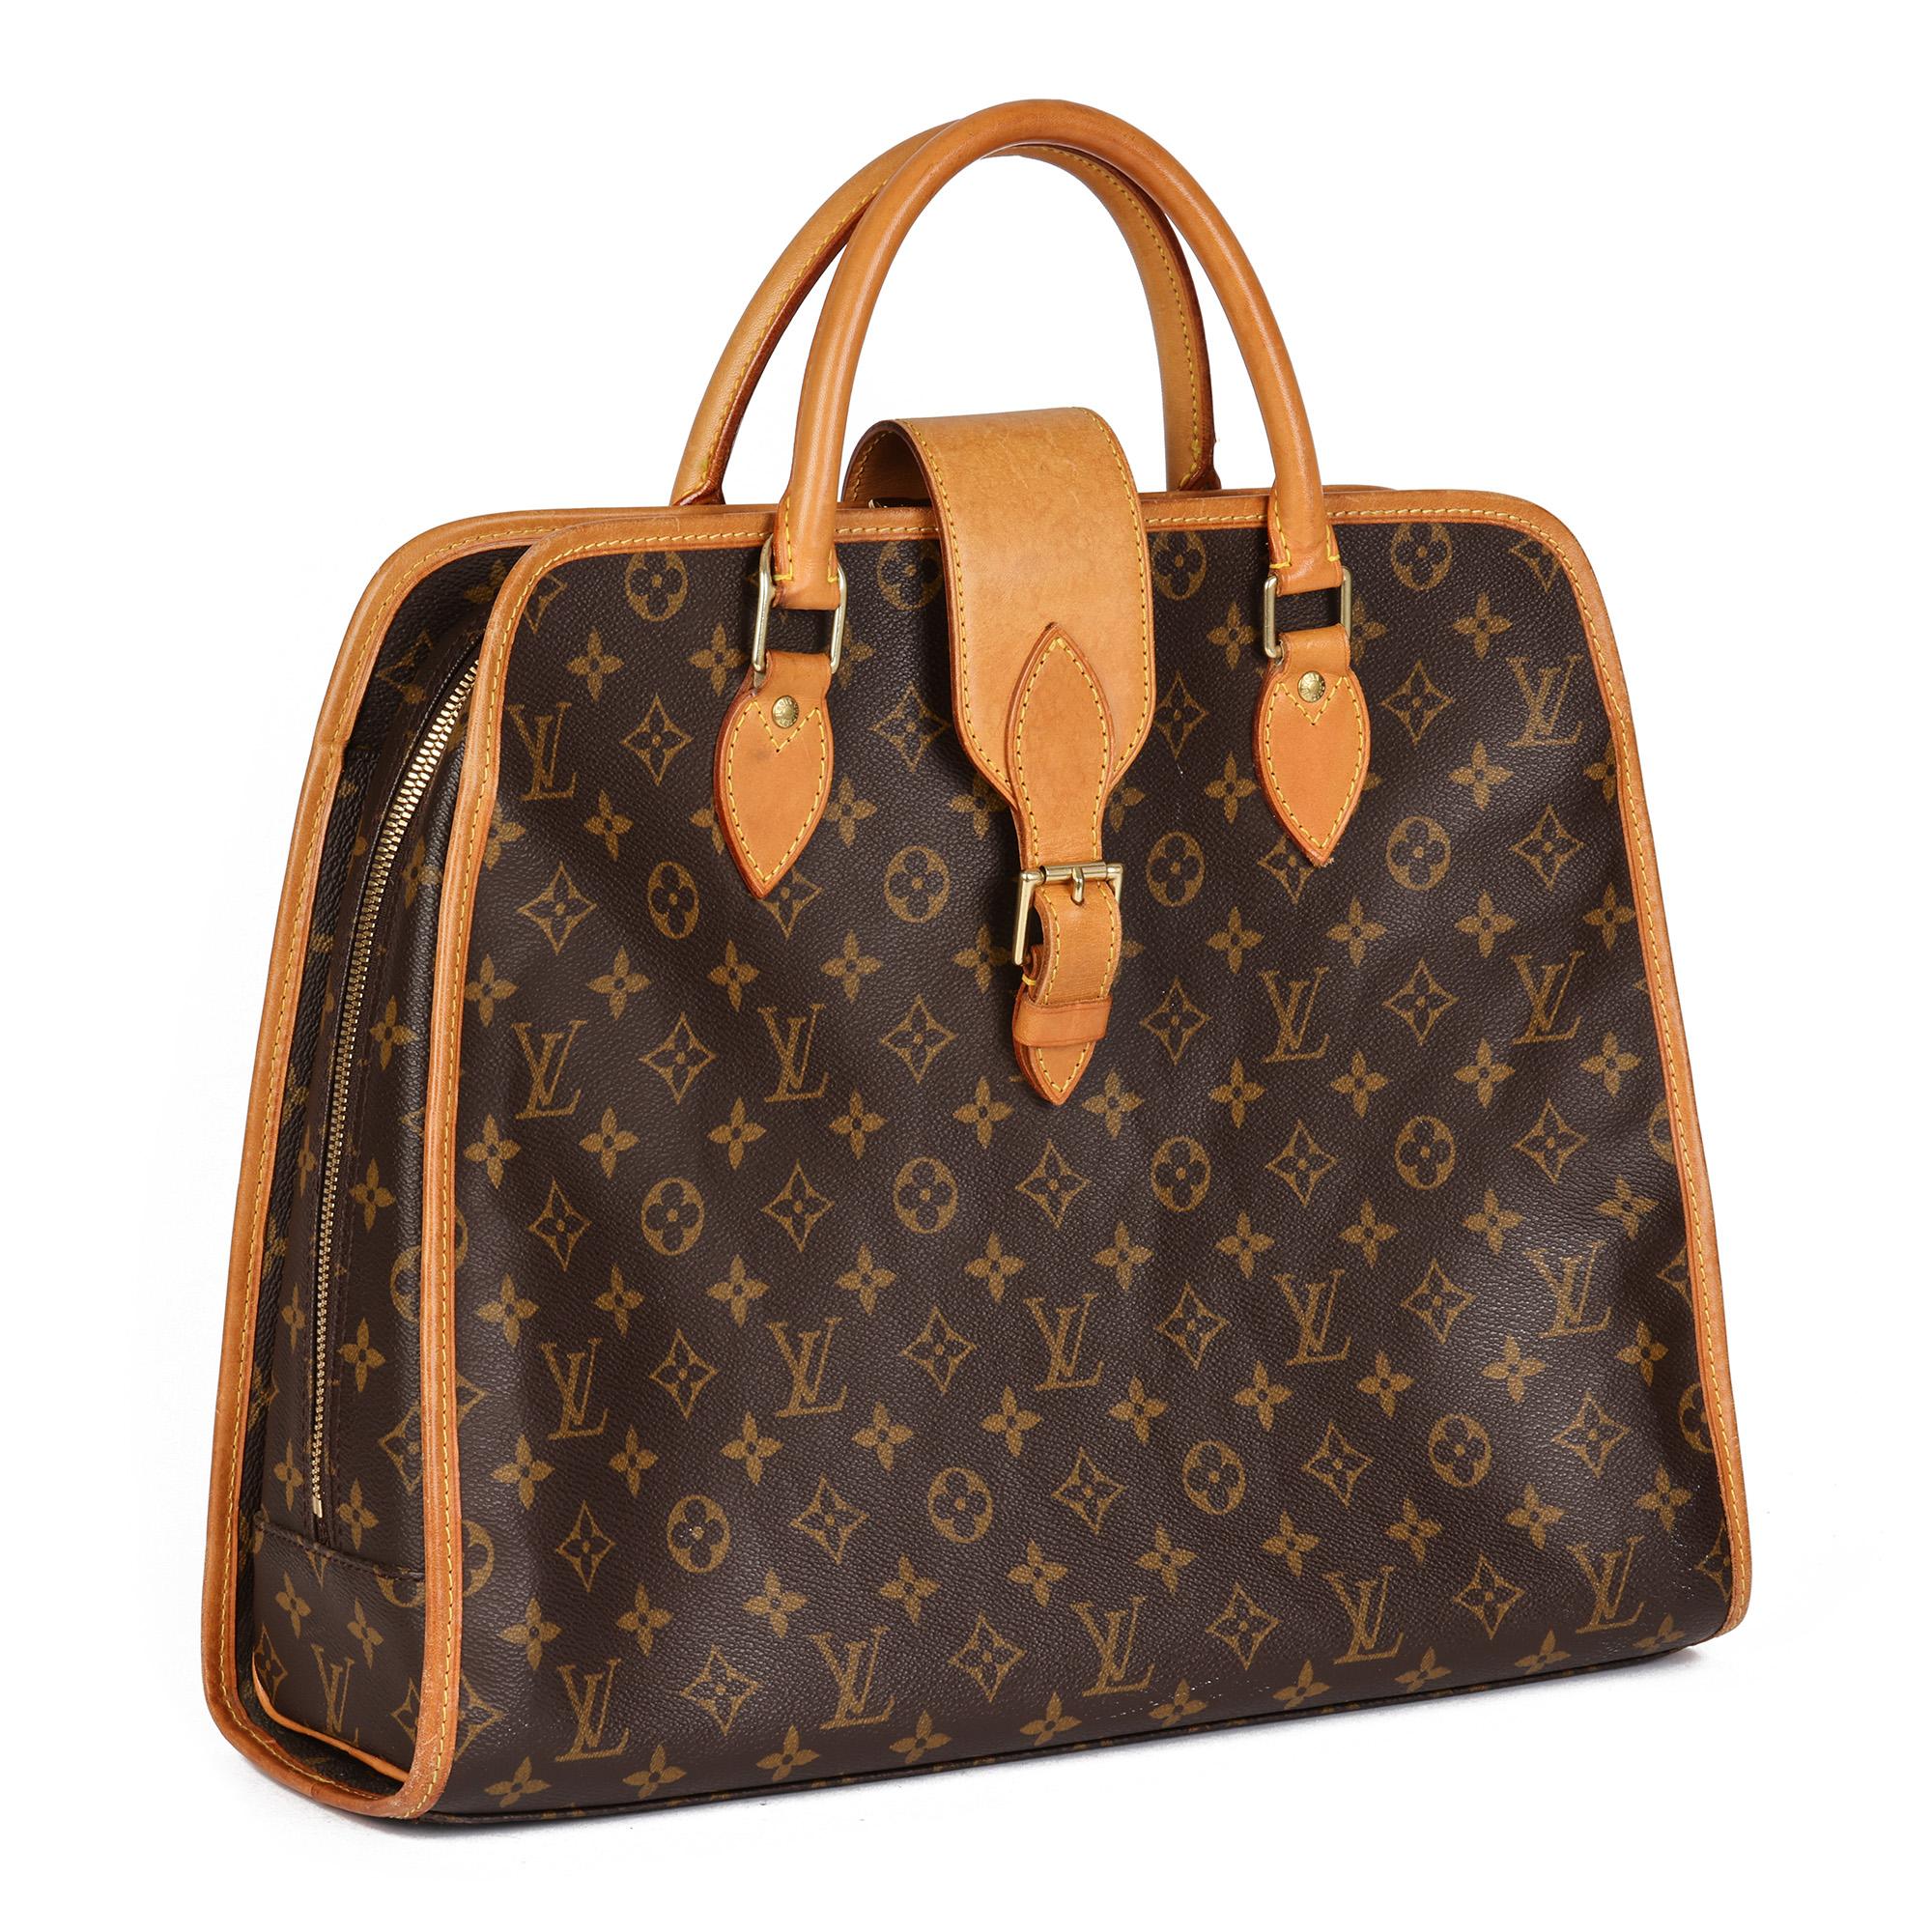 LOUIS VUITTON
Brown Monogram Coated Canvas & Vachetta Leather Vintage Rivoli

Xupes Reference: CB616
Serial Number: MI0968
Age (Circa): 1998
Authenticity Details: Date Stamp (Made in France)
Gender: Ladies
Type: Tote, Travel

Colour: Brown
Hardware: